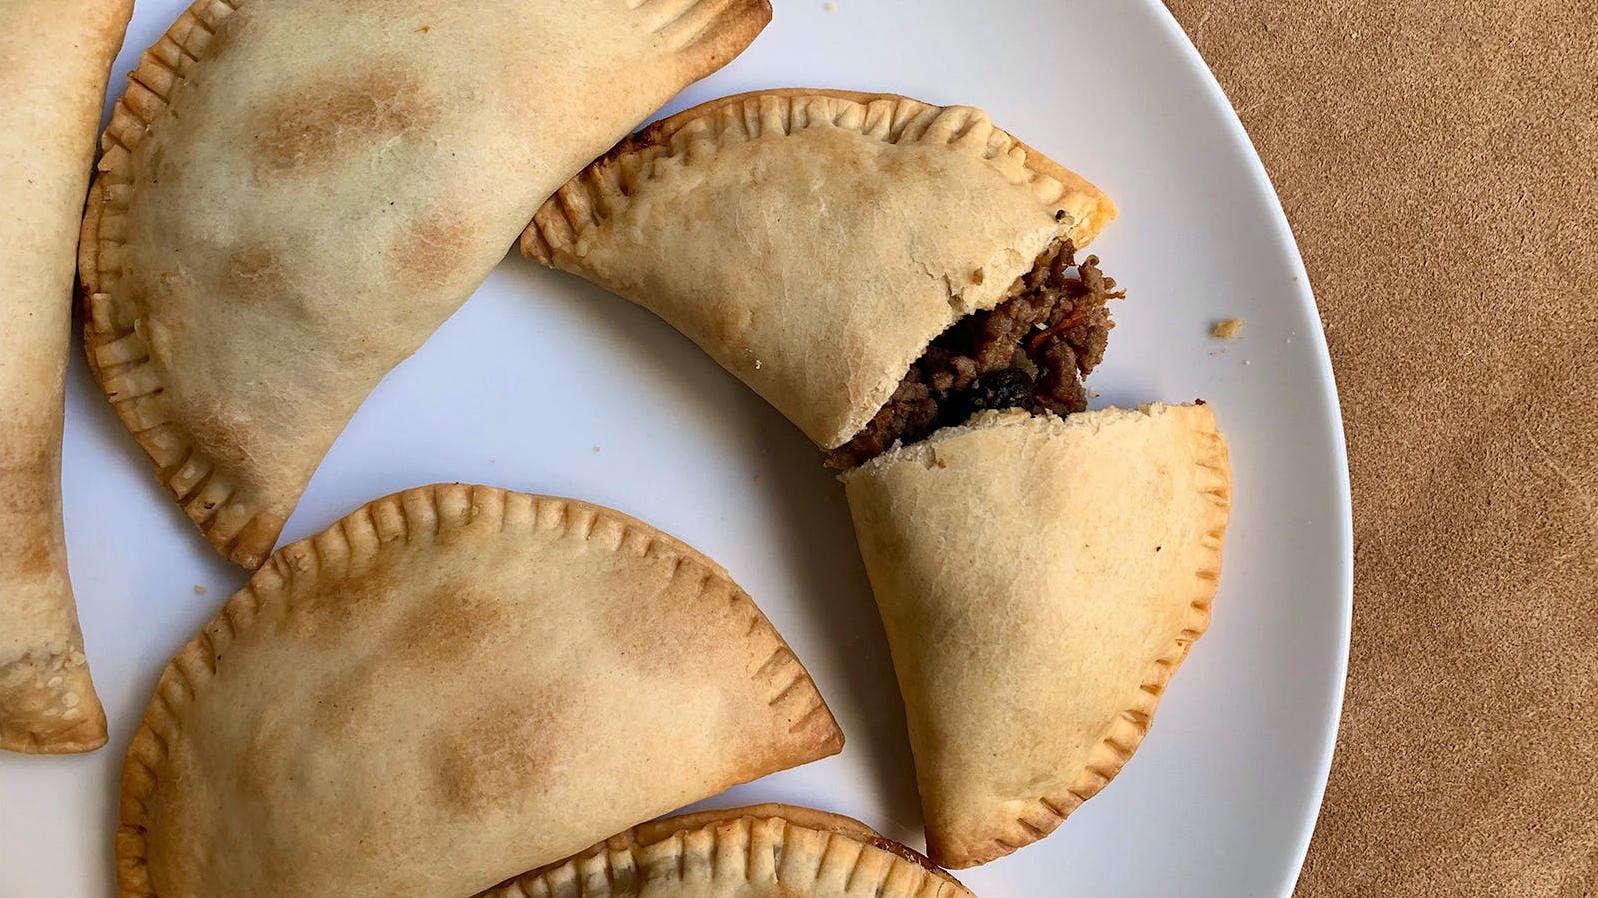  Sweet and spicy empanadas that will take your taste buds on a ride!